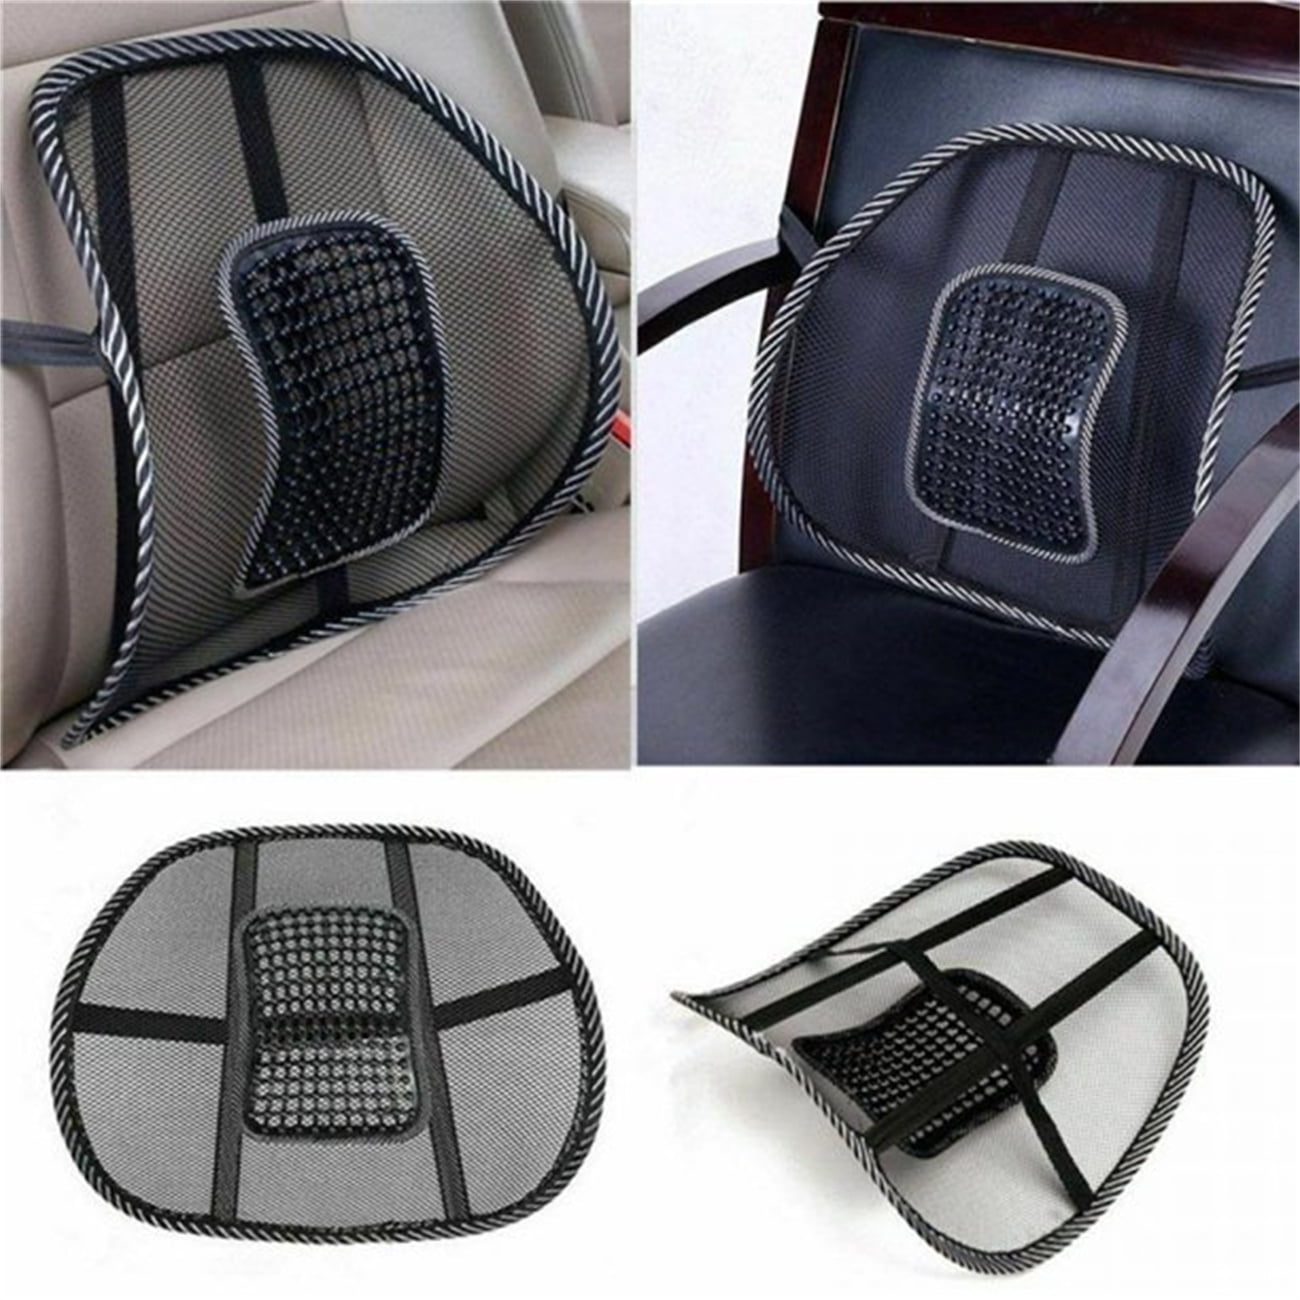 Car Back Support Chair Wood Beads Chair Support Massage Lumbar Waist  Cushion Mesh Ventilate Cushion Pad For Car Office Trusted - AliExpress